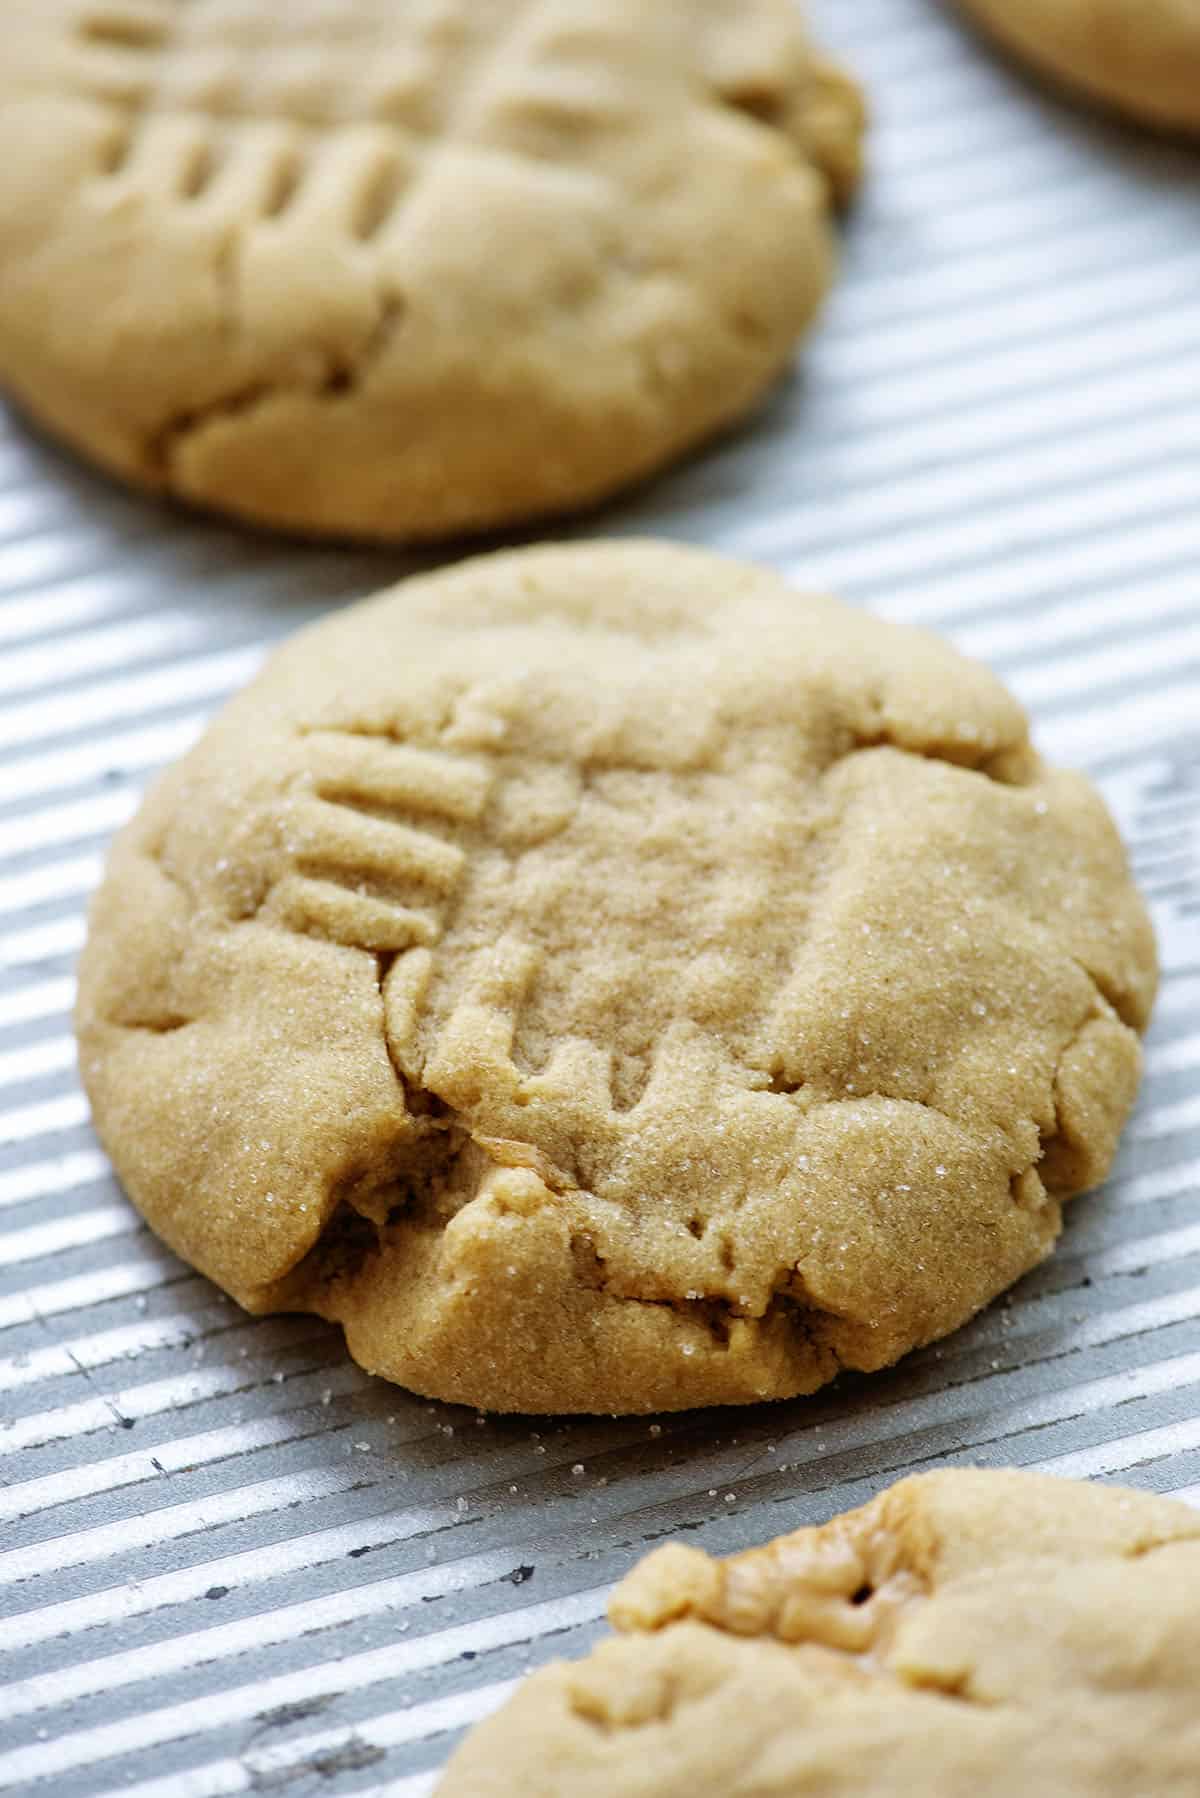 baked peanut butter cookies on cookie sheet.